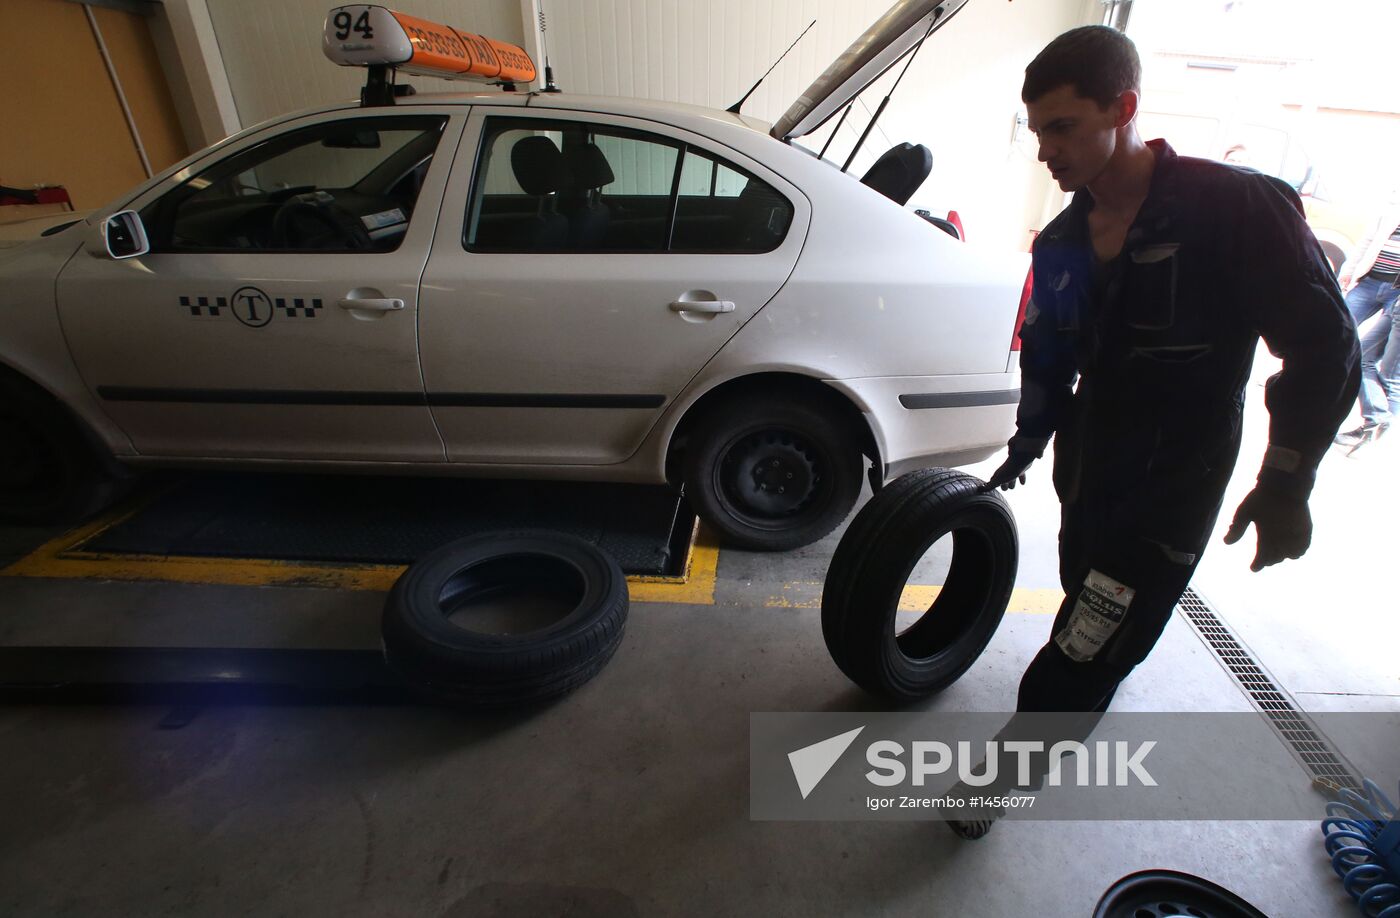 Work of tire centers in Russian cities